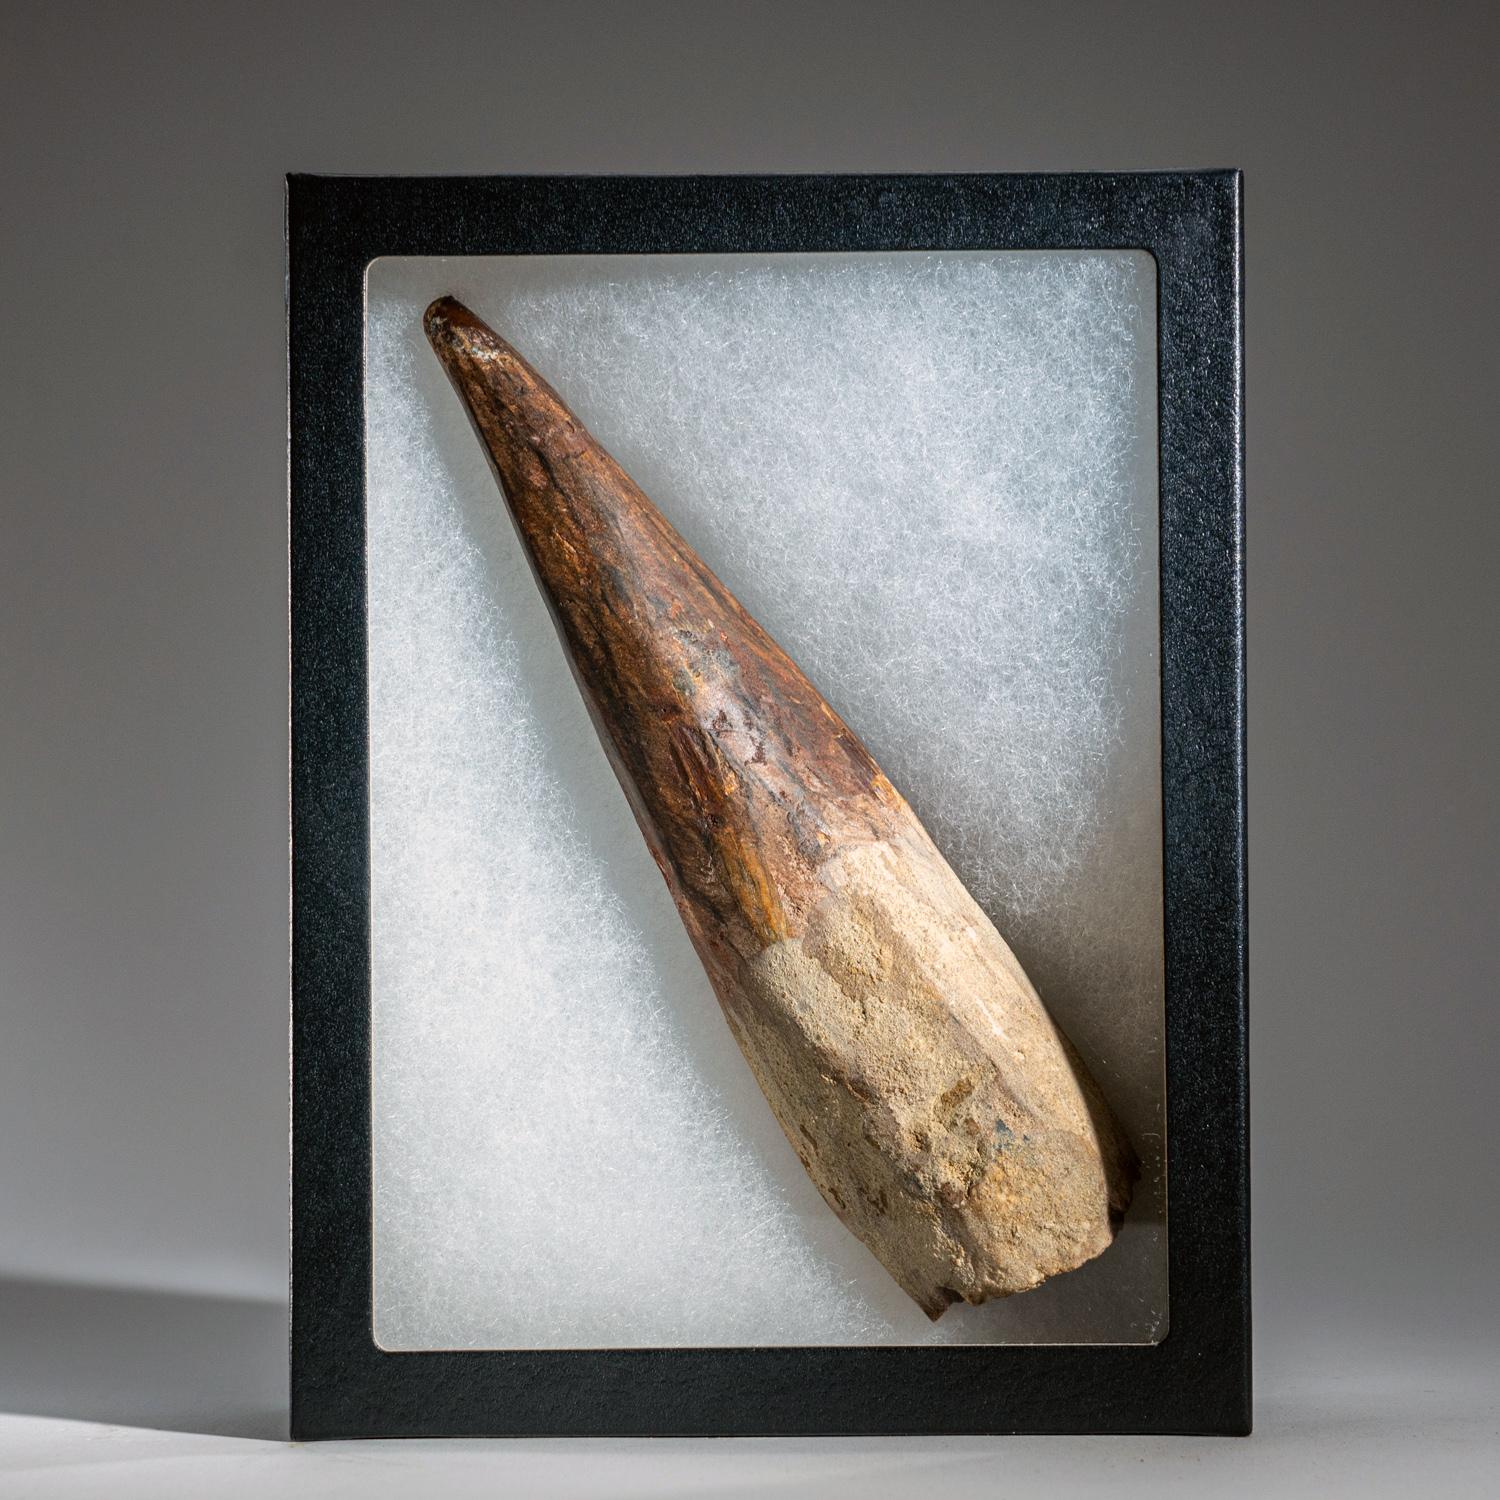 This huge, Museum-quality Spinosaur tooth is completely in tact with no repairs. This incredible specimen includes a display box for preservation and display purposes. Spinosaurus (meaning 